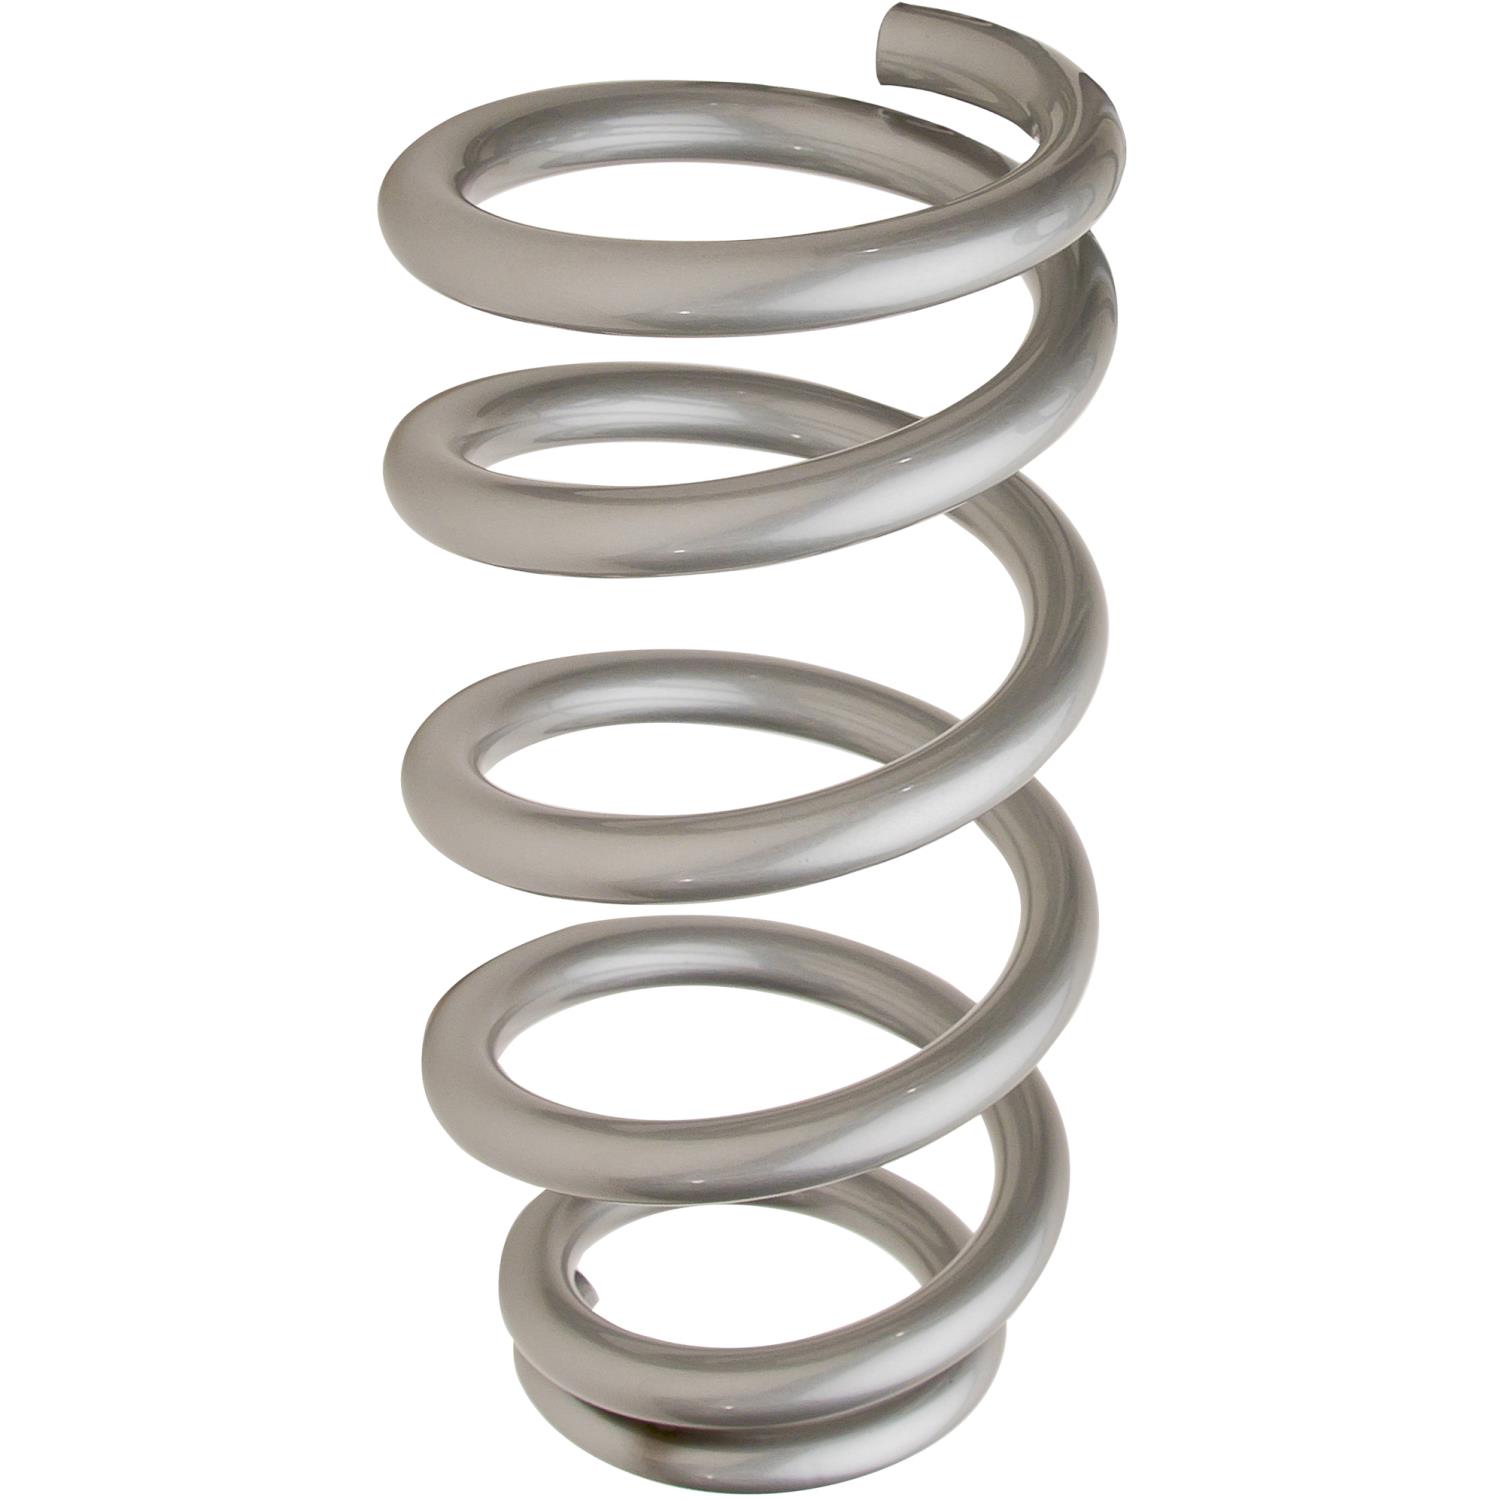 Variable Rate High-Tensile Spring 10